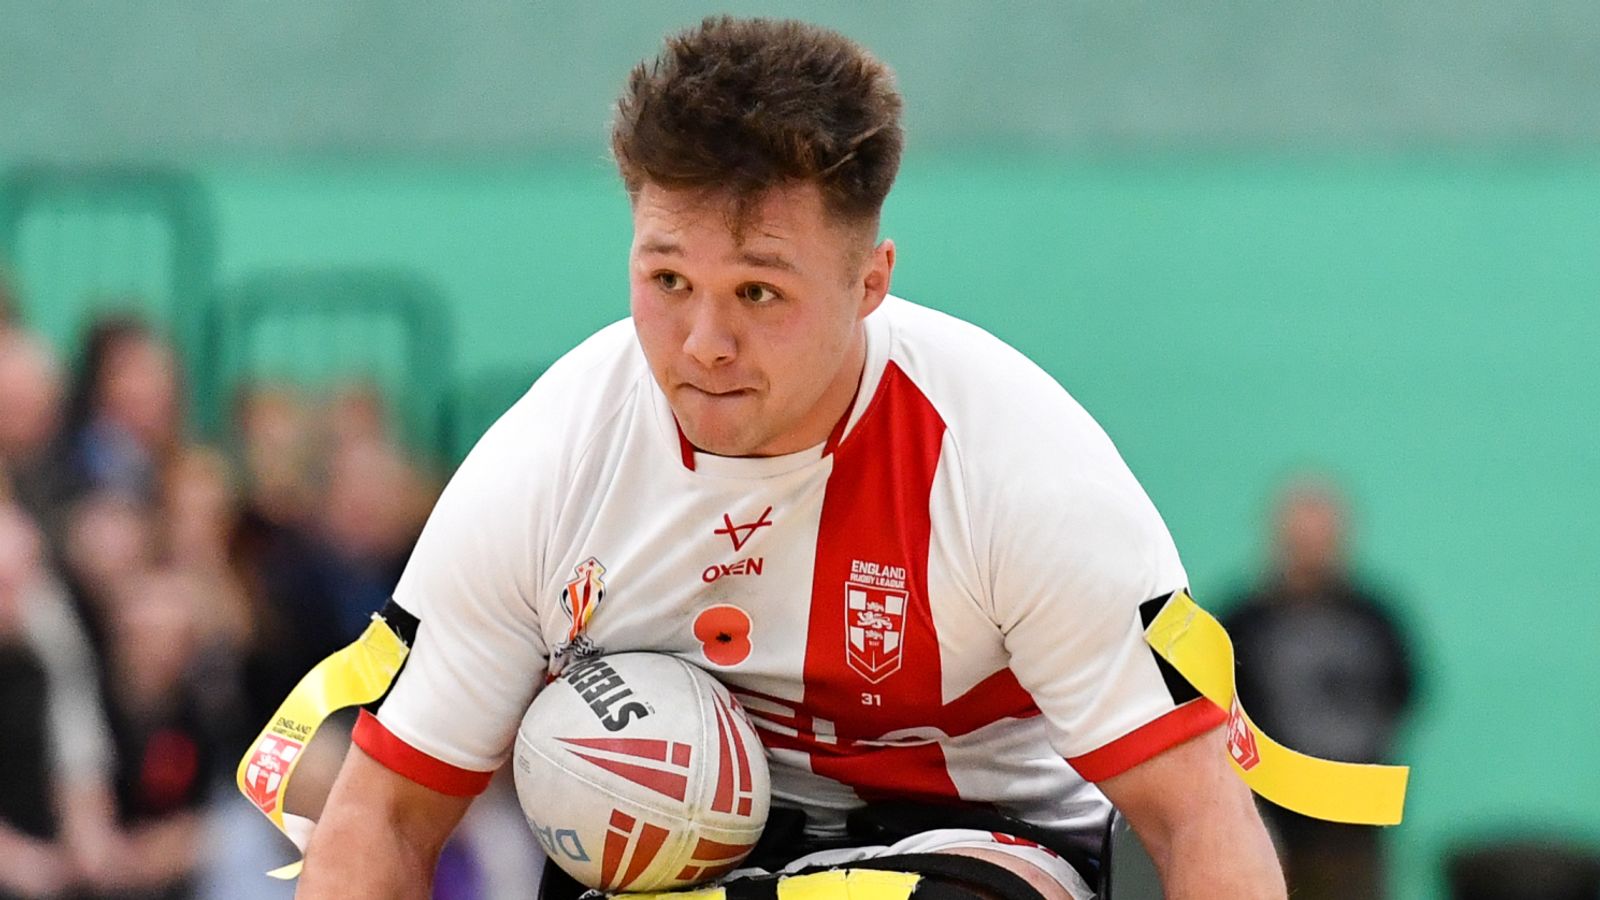 England’s wheelchair rugby league team seek to right wrongs against France in Sunday’s international